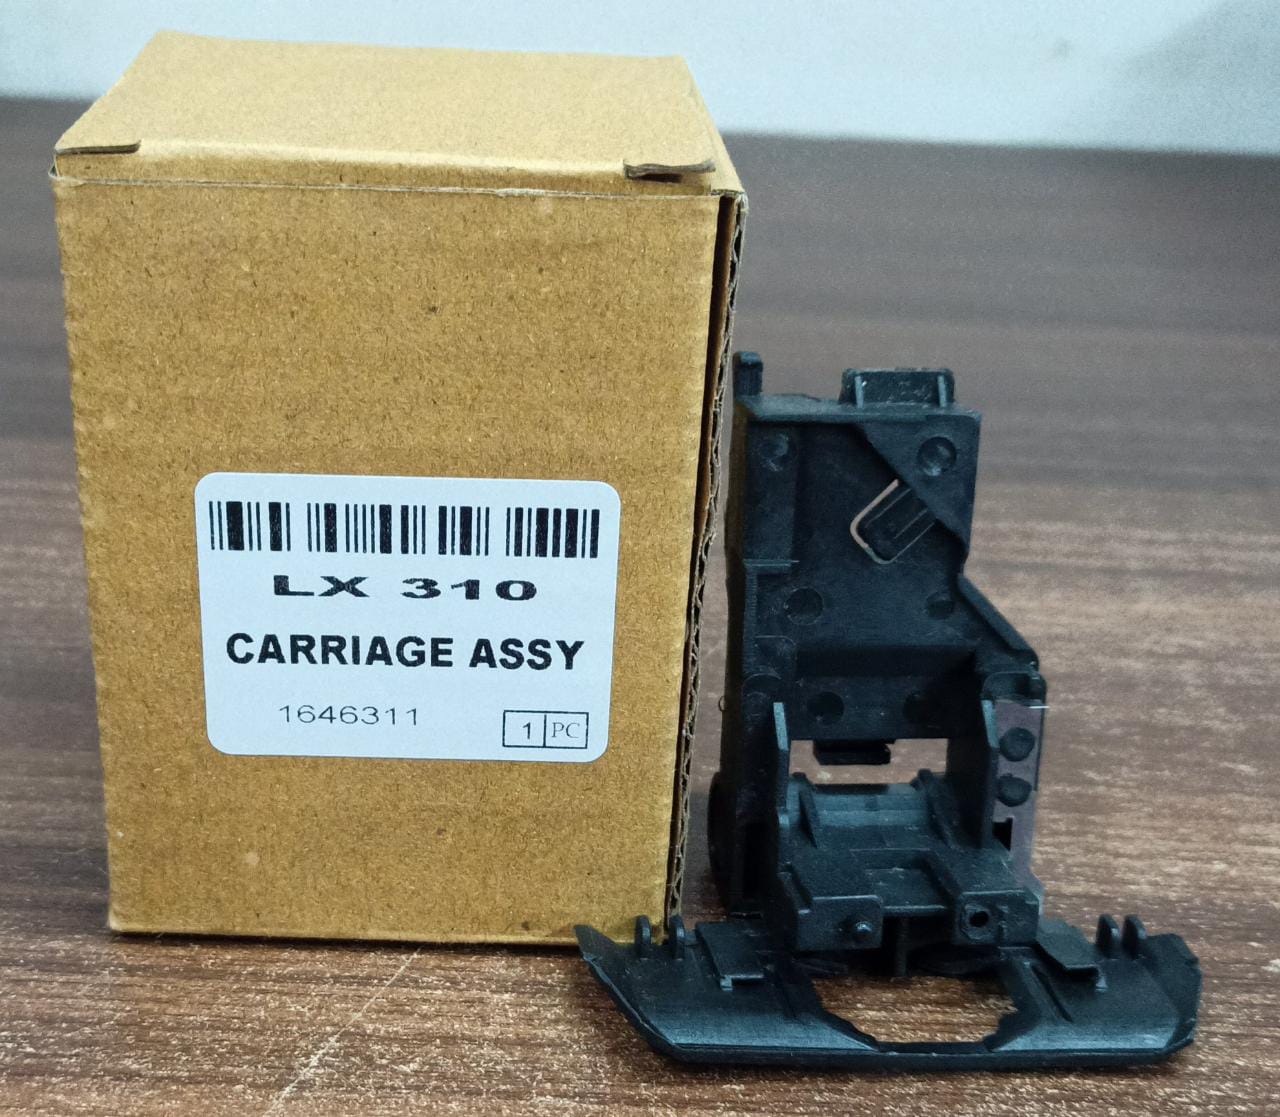 Epson Carriage Assy Lx 310